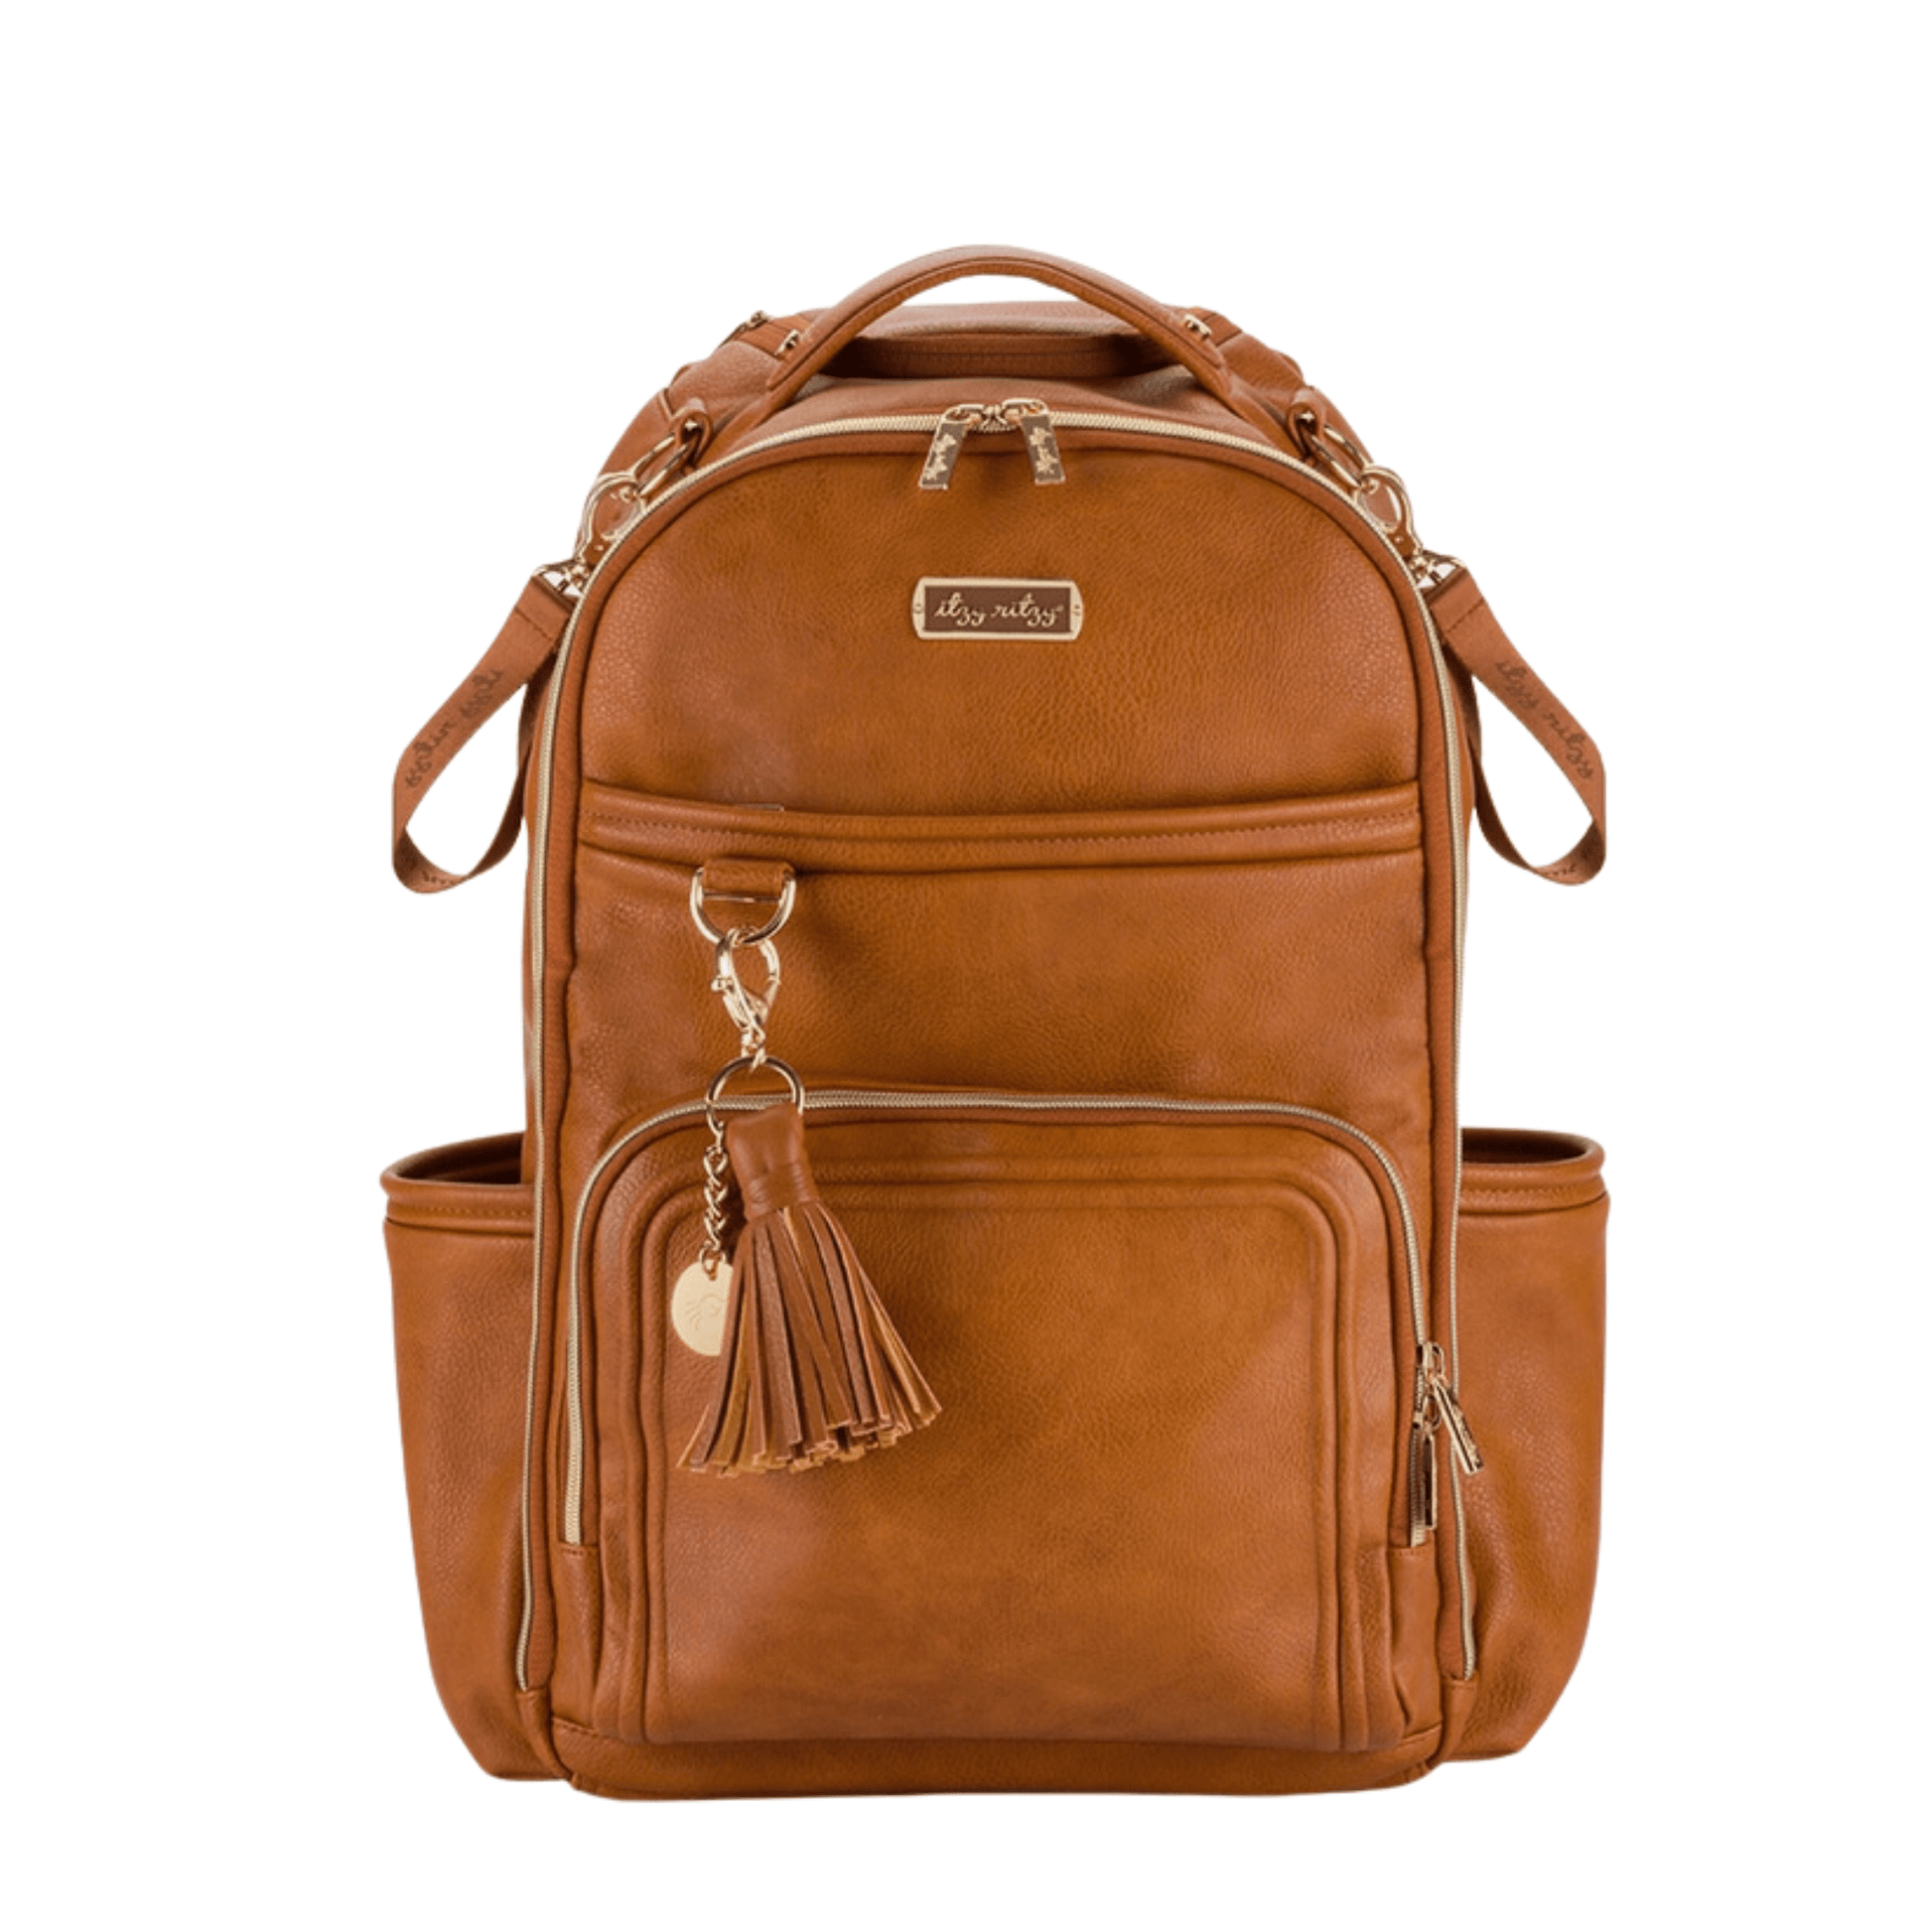 Itzy Ritzy Diaper Bags Cognac neutral tone large capacity travel luggage backpack and diaper bag